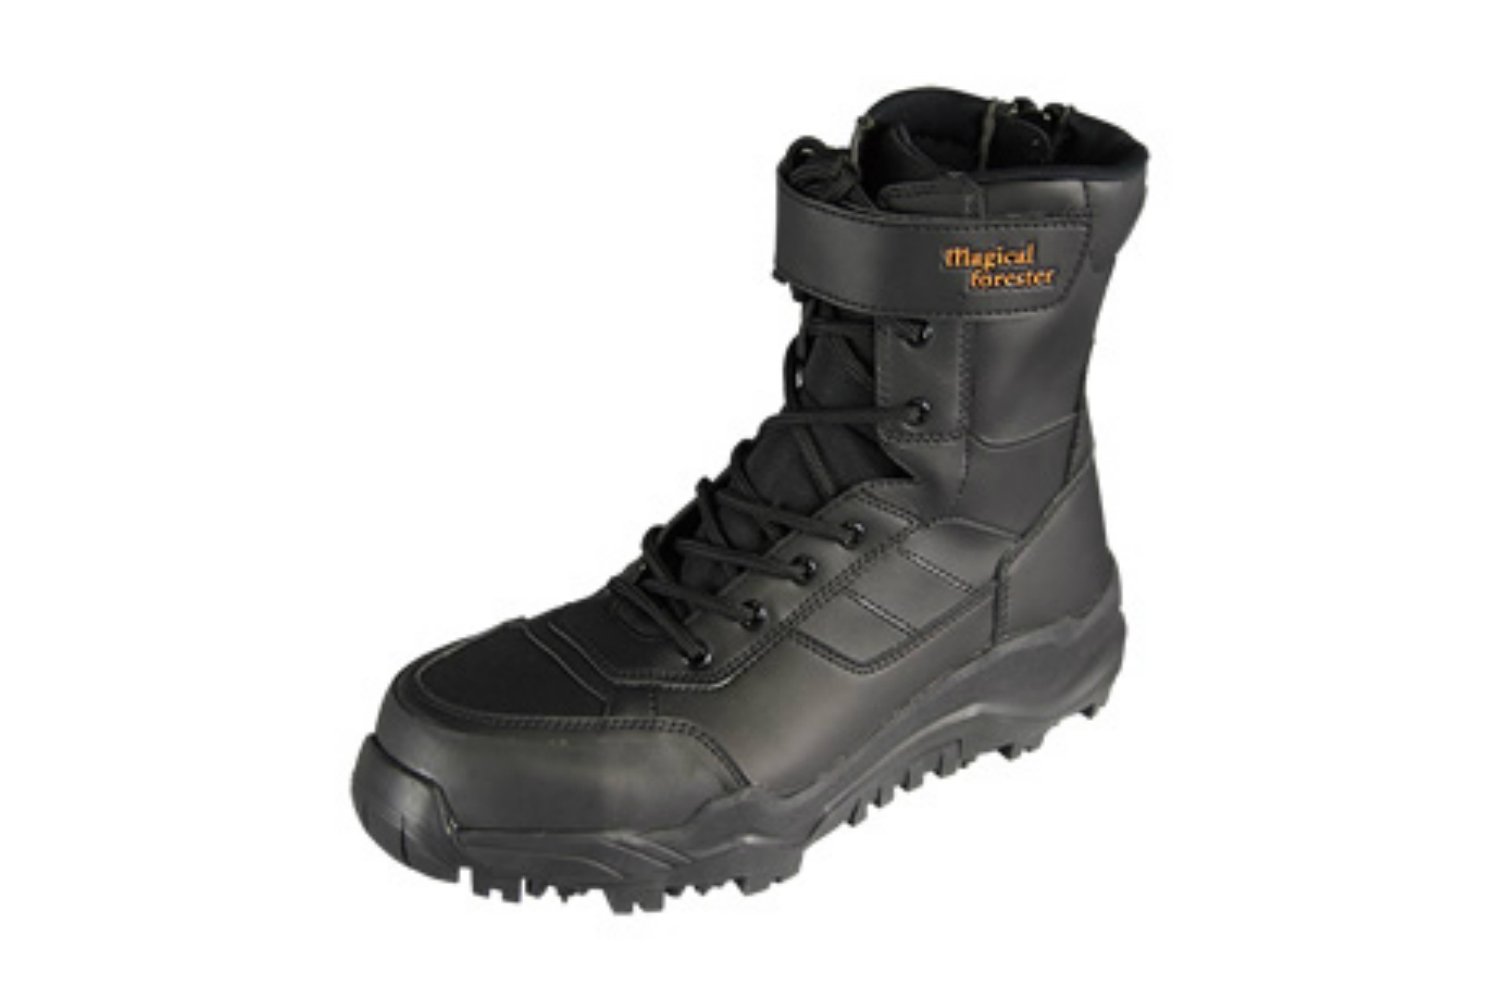 Hard Toe Spiked Working Boots: Magical Forester 005